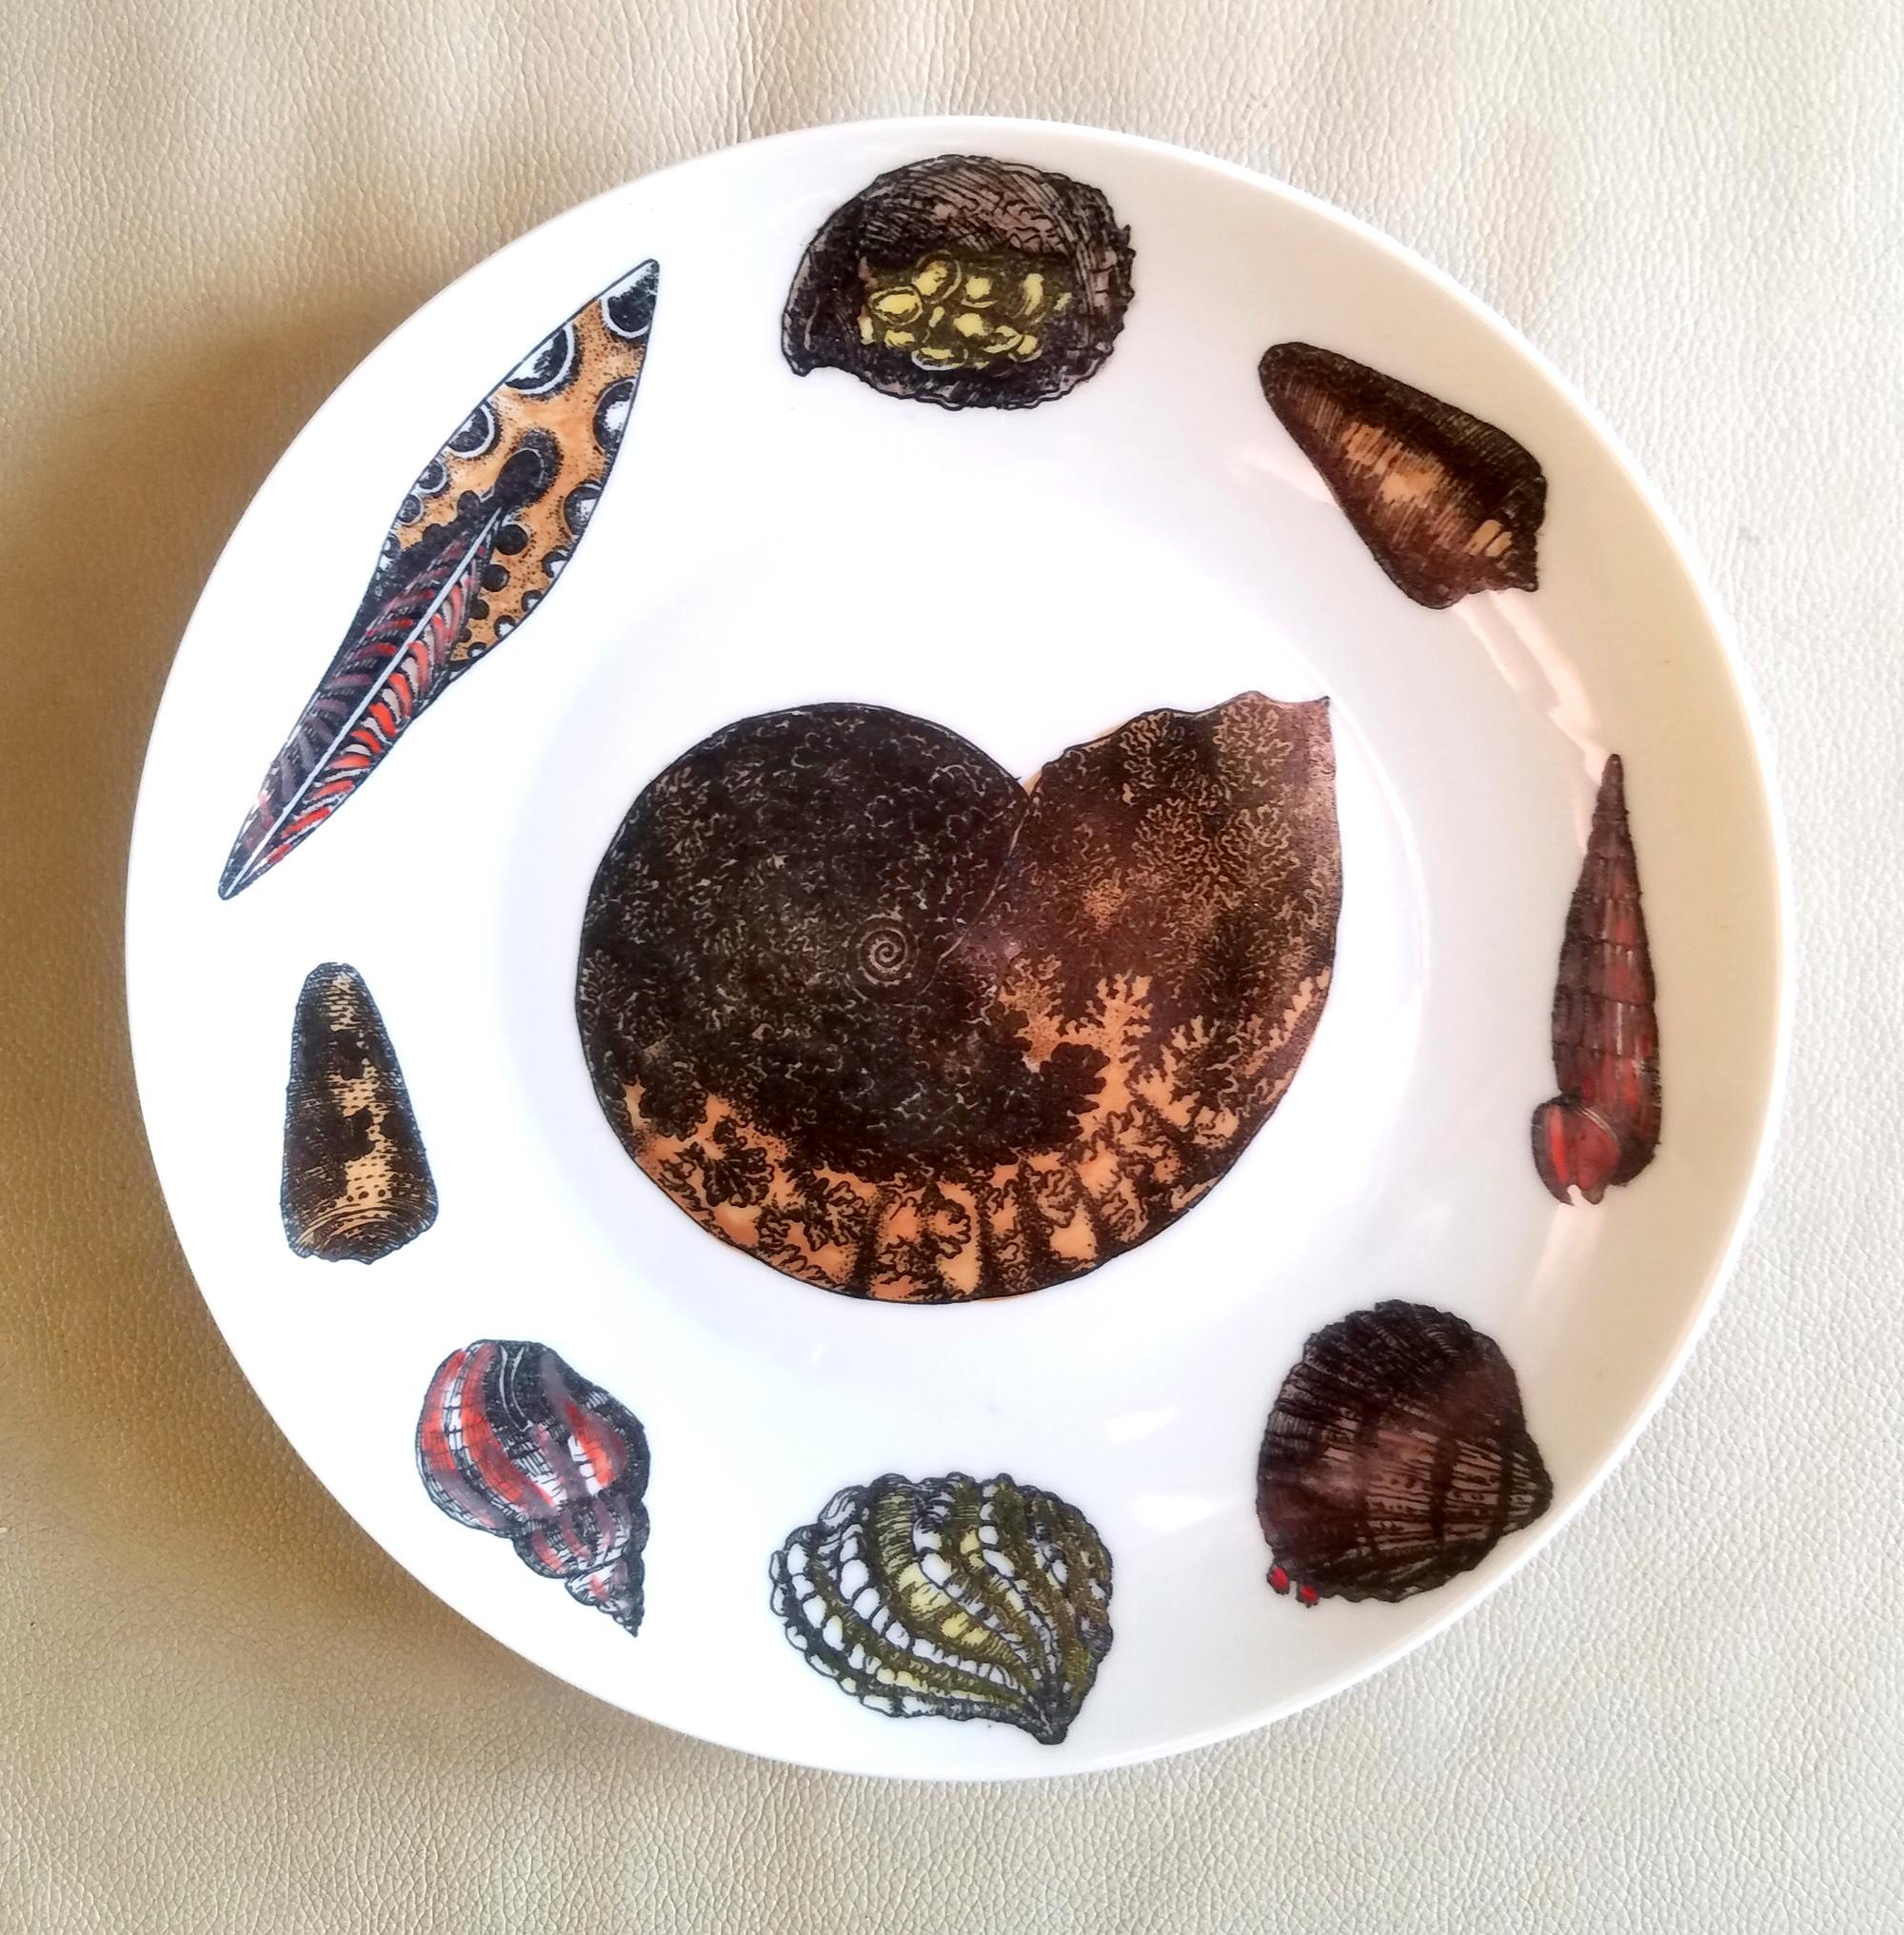 Piero Fornasetti Porcelain Conchiglie Seashell Set of Plates with Mollusks For Sale 1